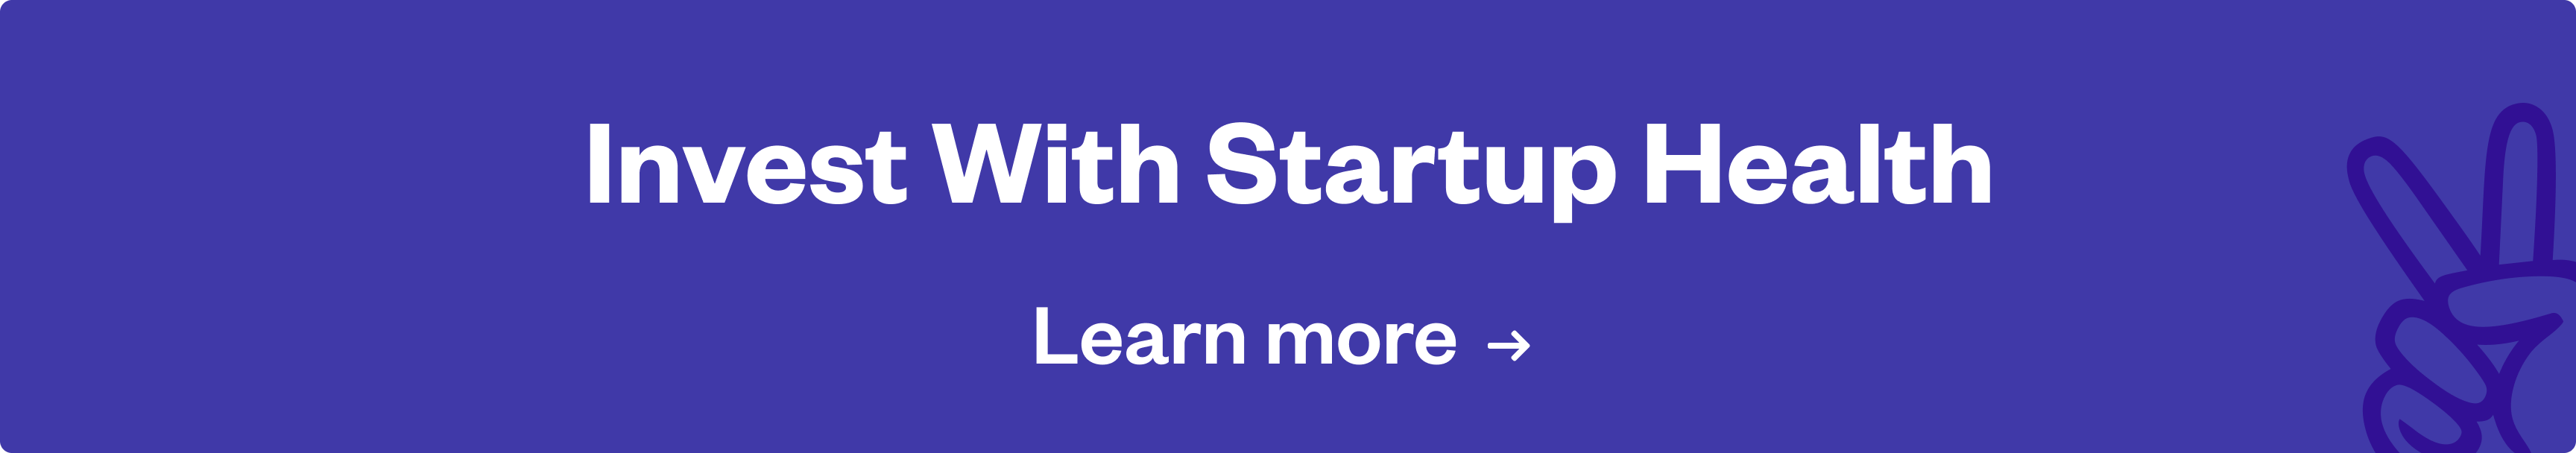 invest with startup health